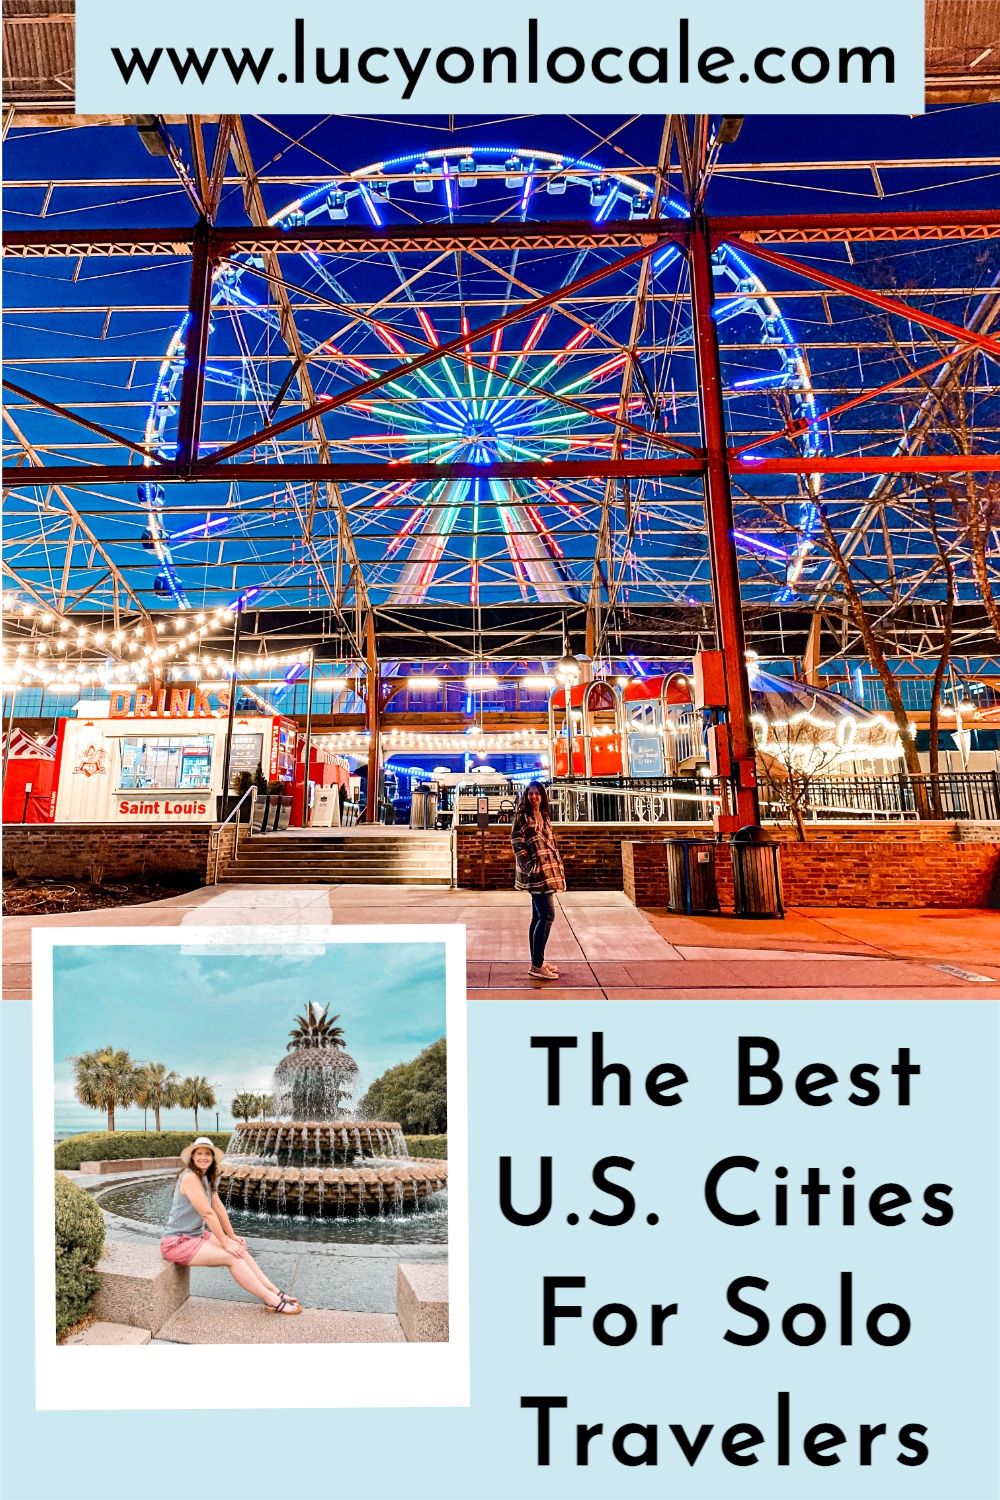 The Best U.S. Cities for Solo Travelers